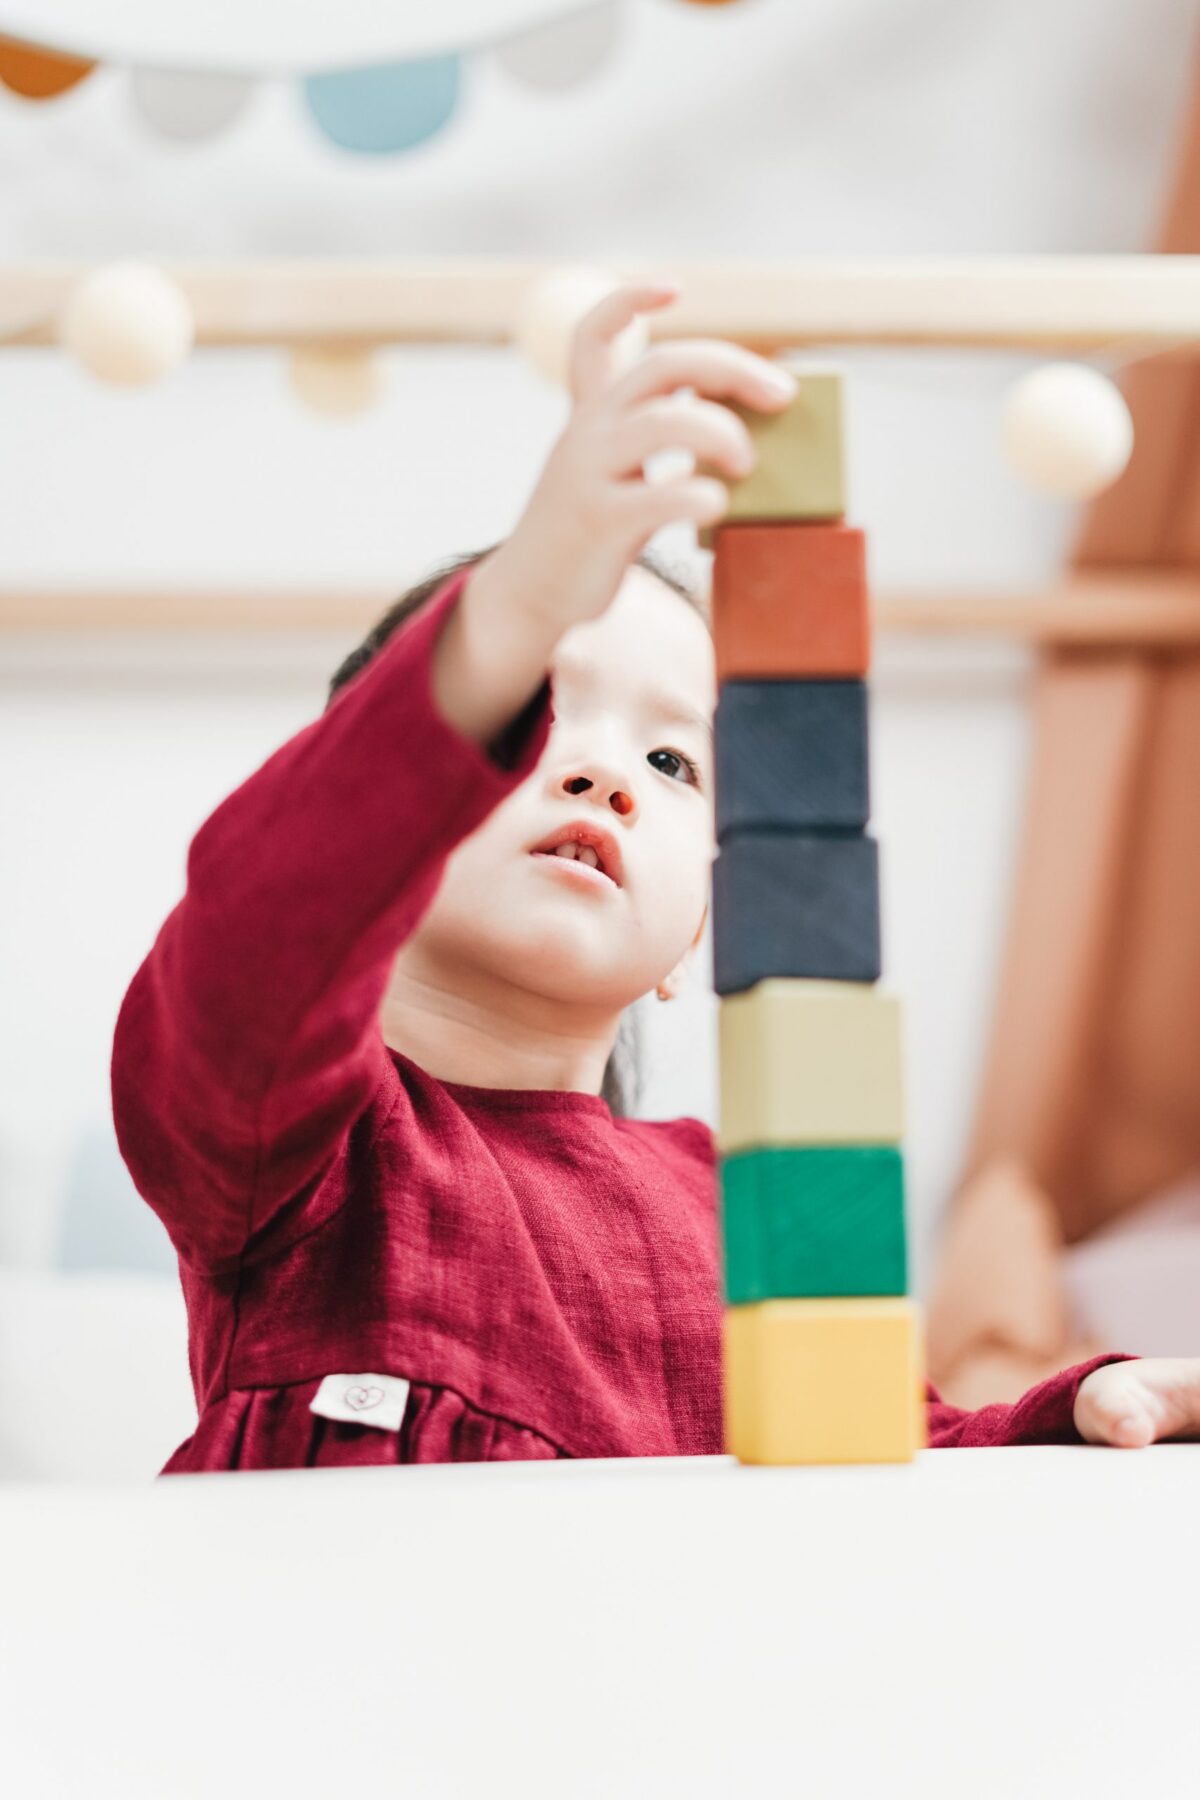 Image of a young child stacking blocks as high as possible